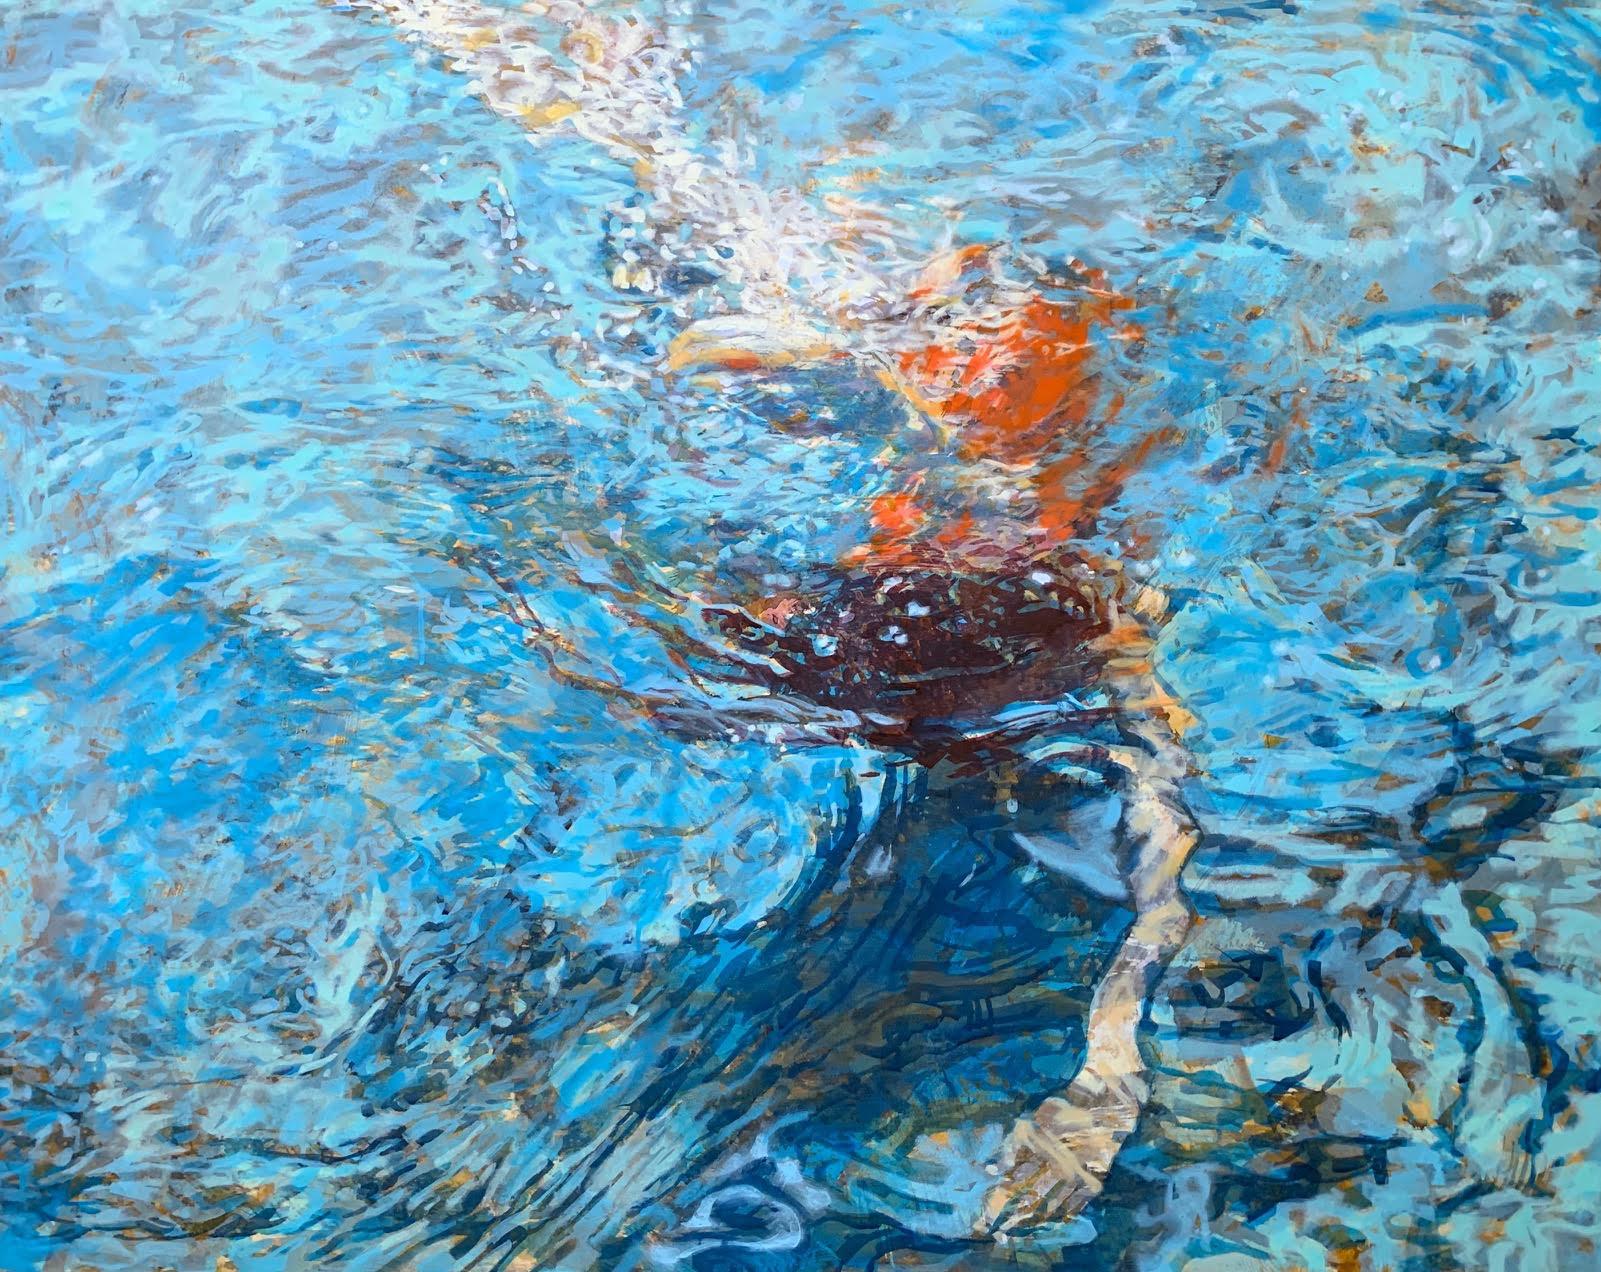 Carol Bennett Figurative Painting - "Kissing the Ground" abstract oil painting of woman in red suit under blue water